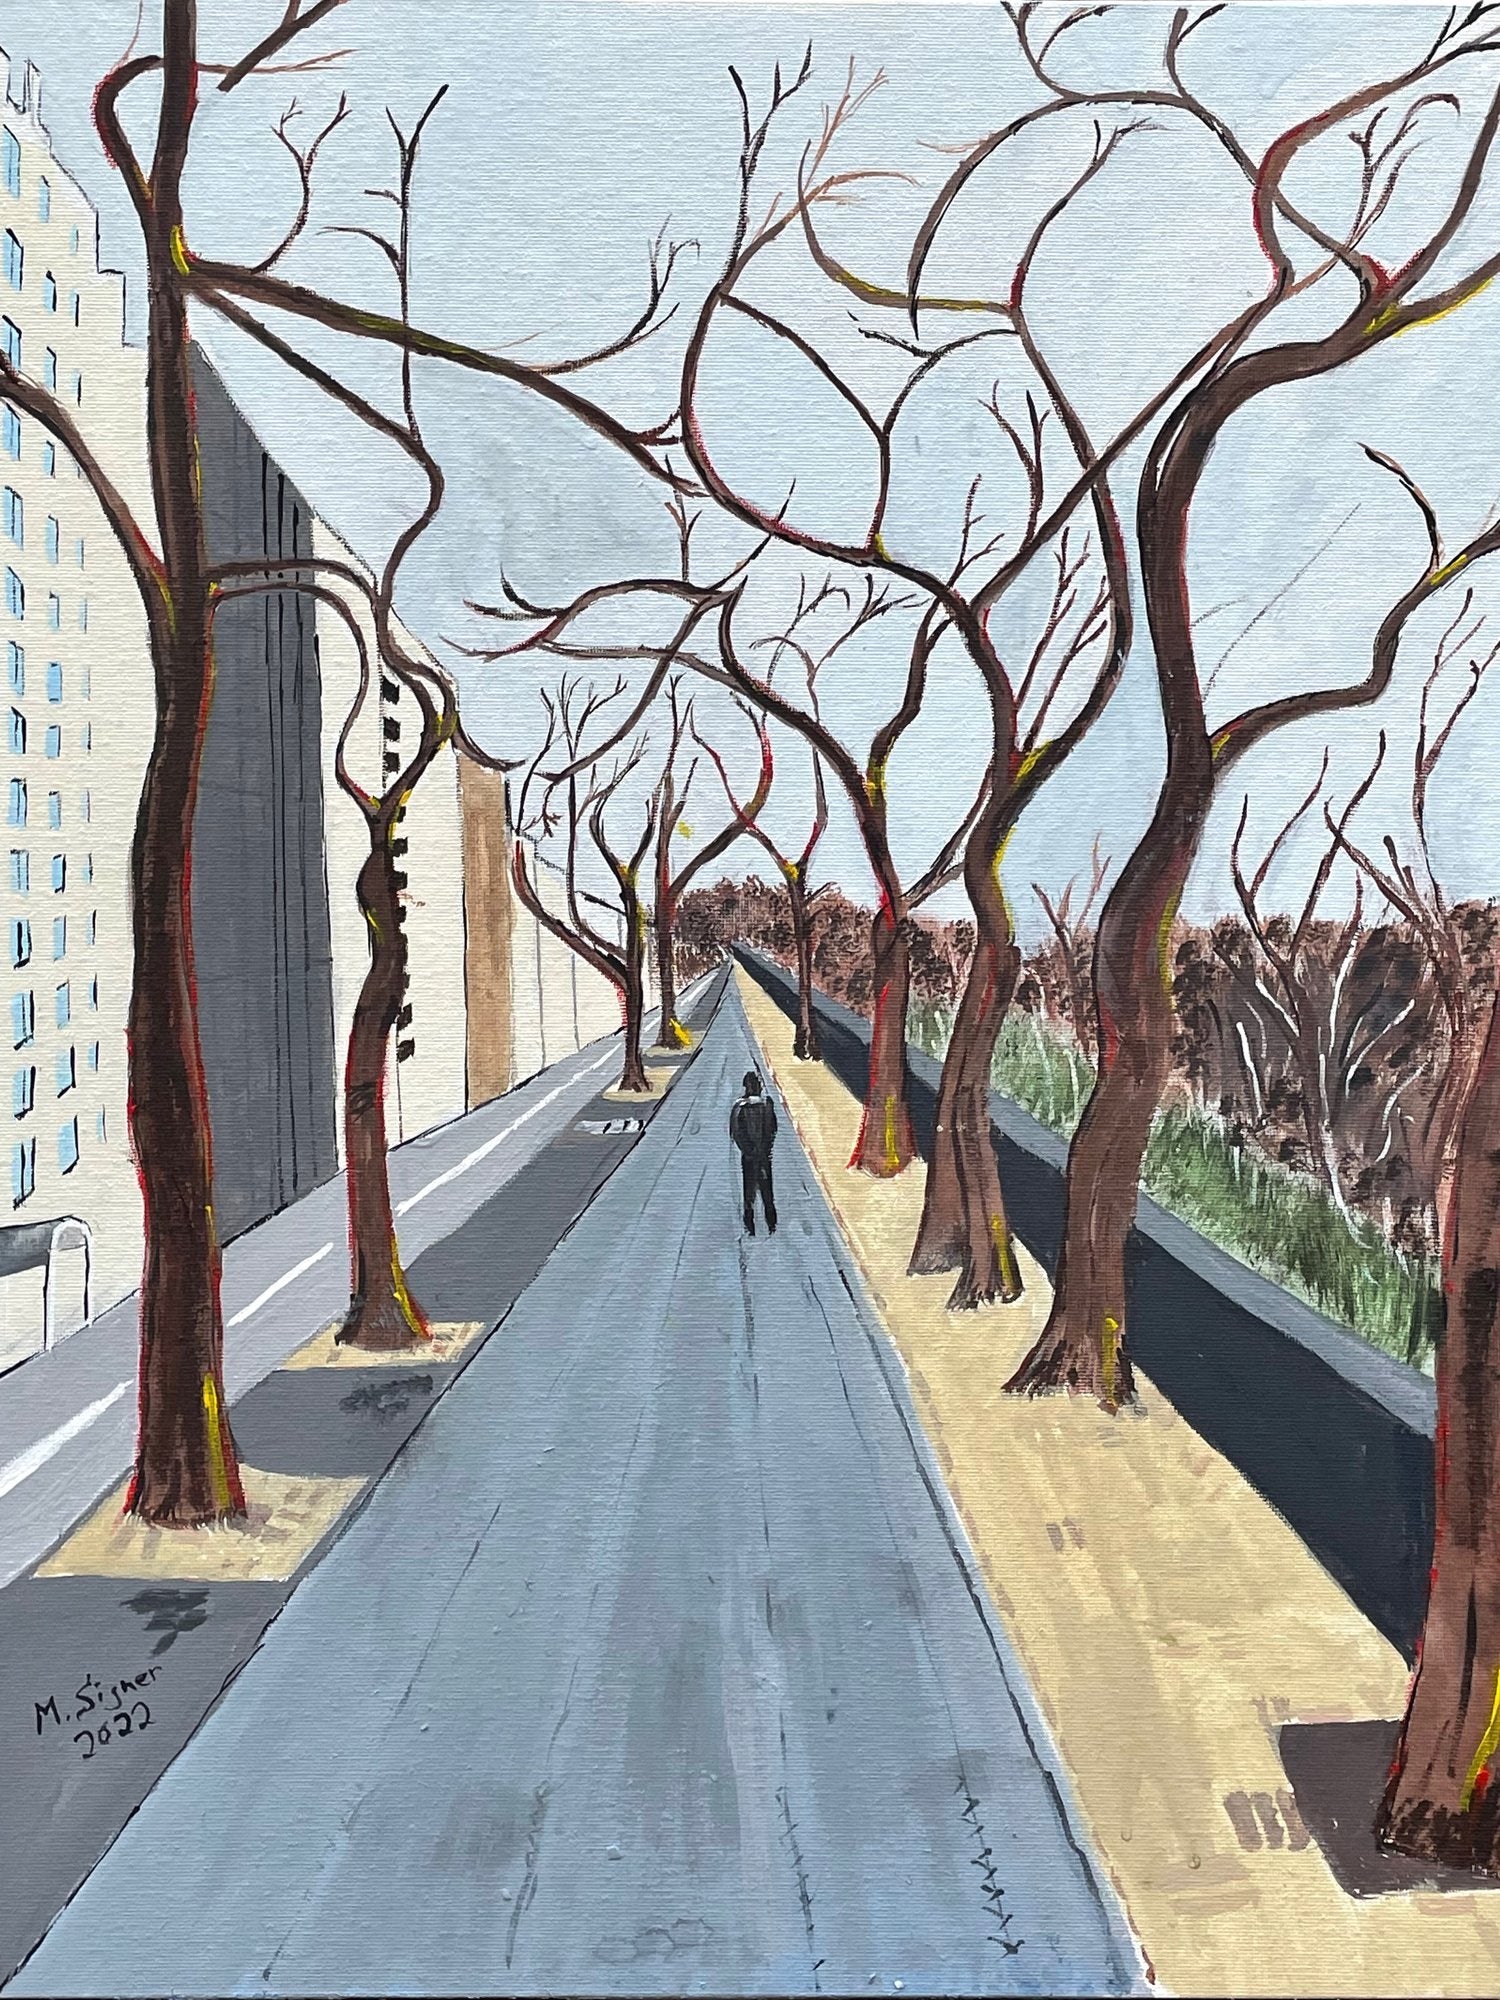 Michael Signer painting of bare trees in March along 5th Ave., New York, NY.